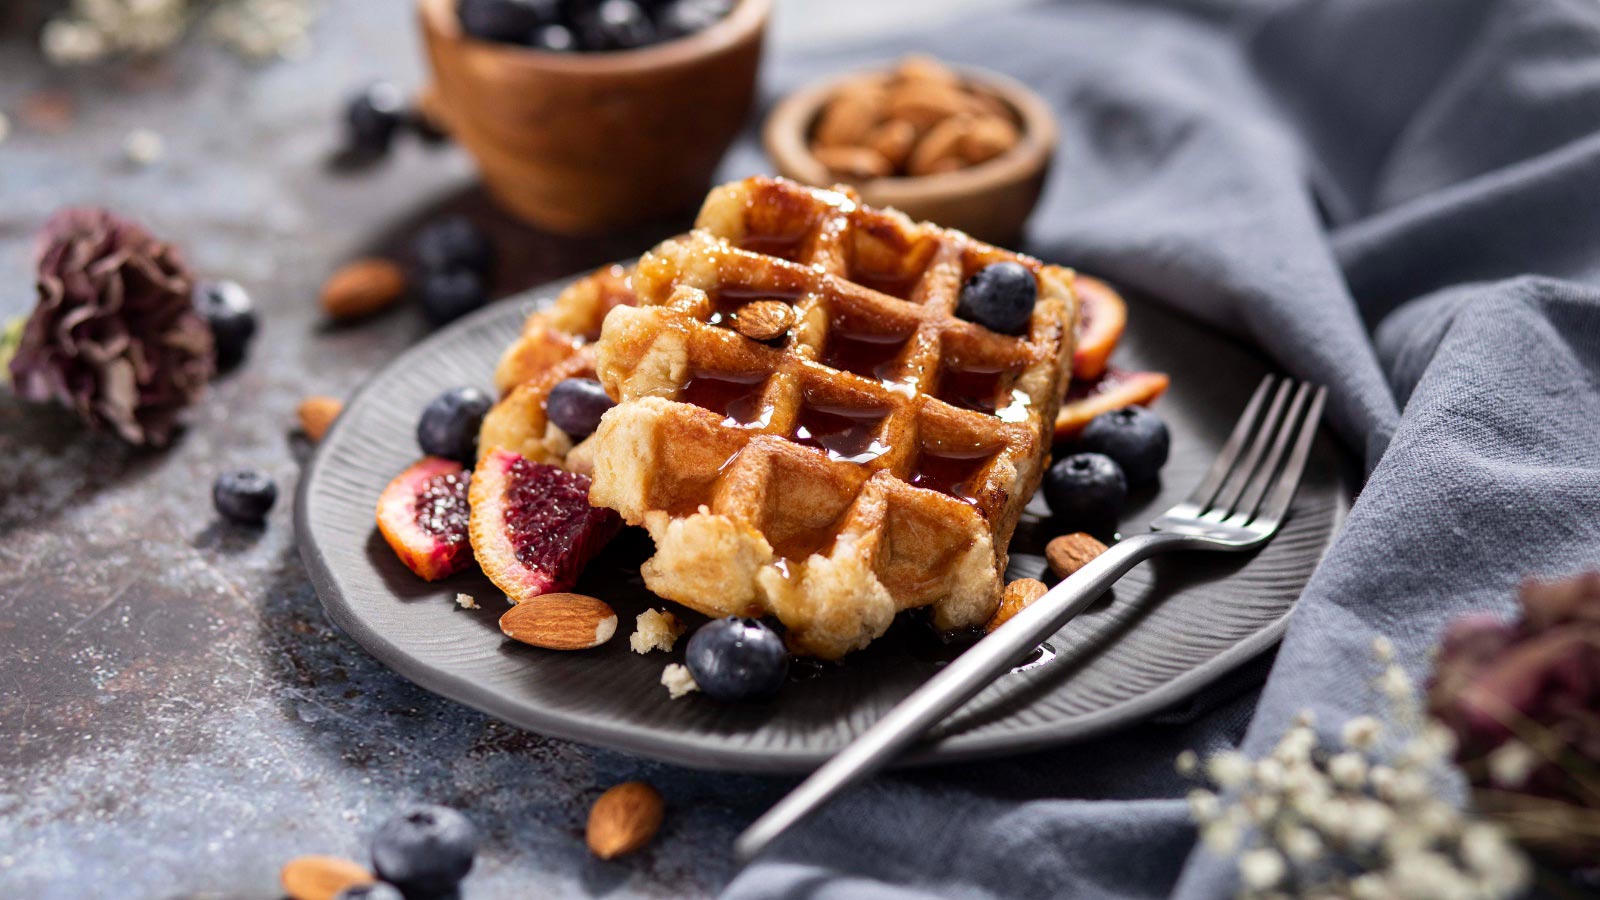 A plate holds homemade almond flour waffles drizzled with syrup and fresh blueberries.